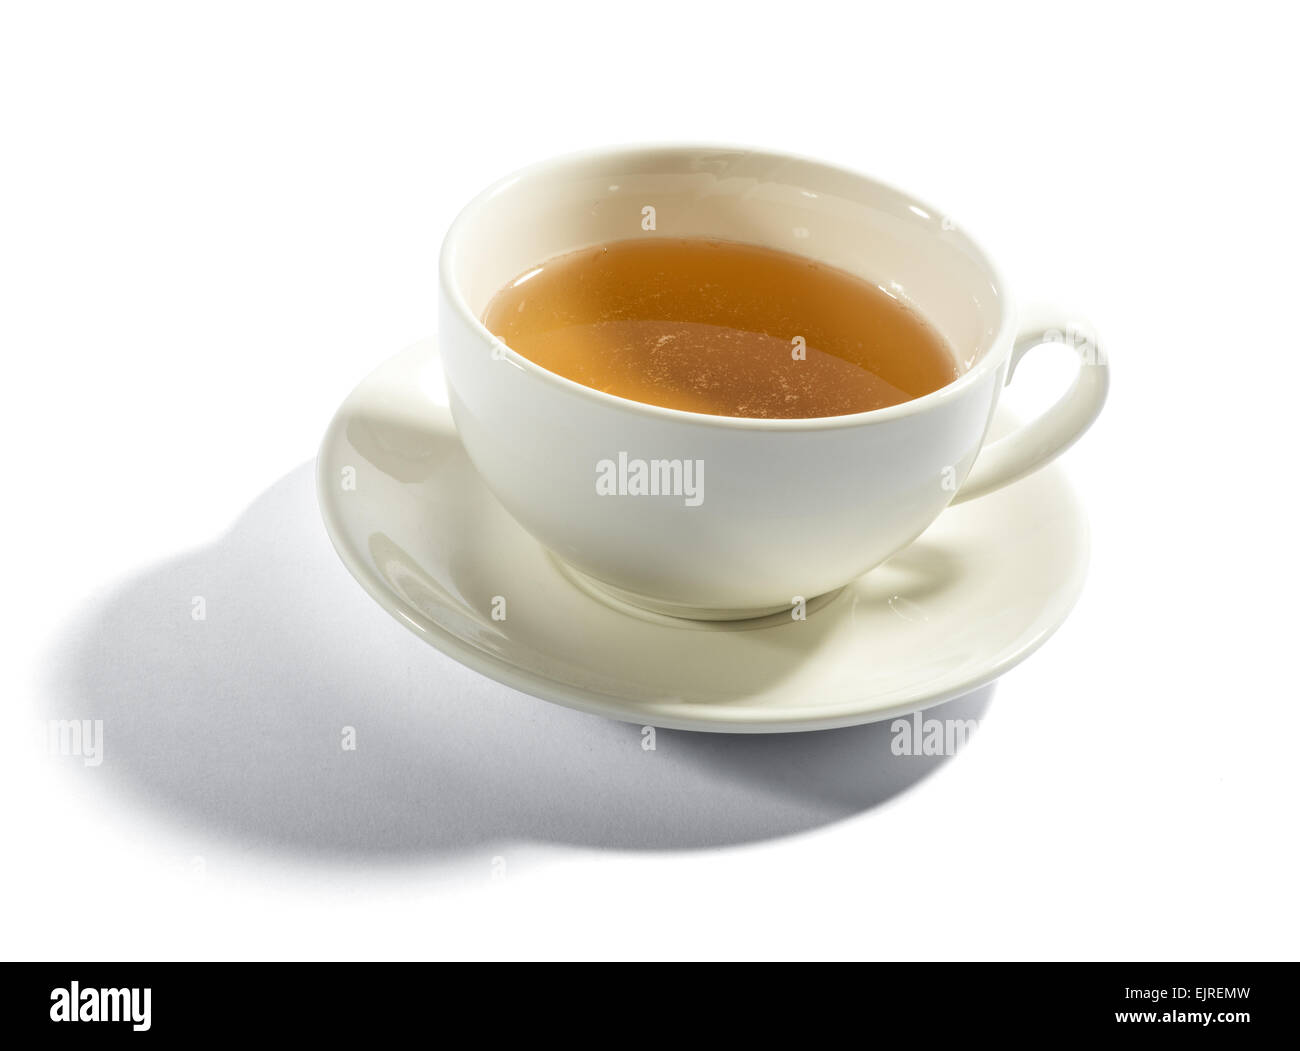 Cup of tea in a white porcelain teacup, high angle view of the beverage over a white background Stock Photo